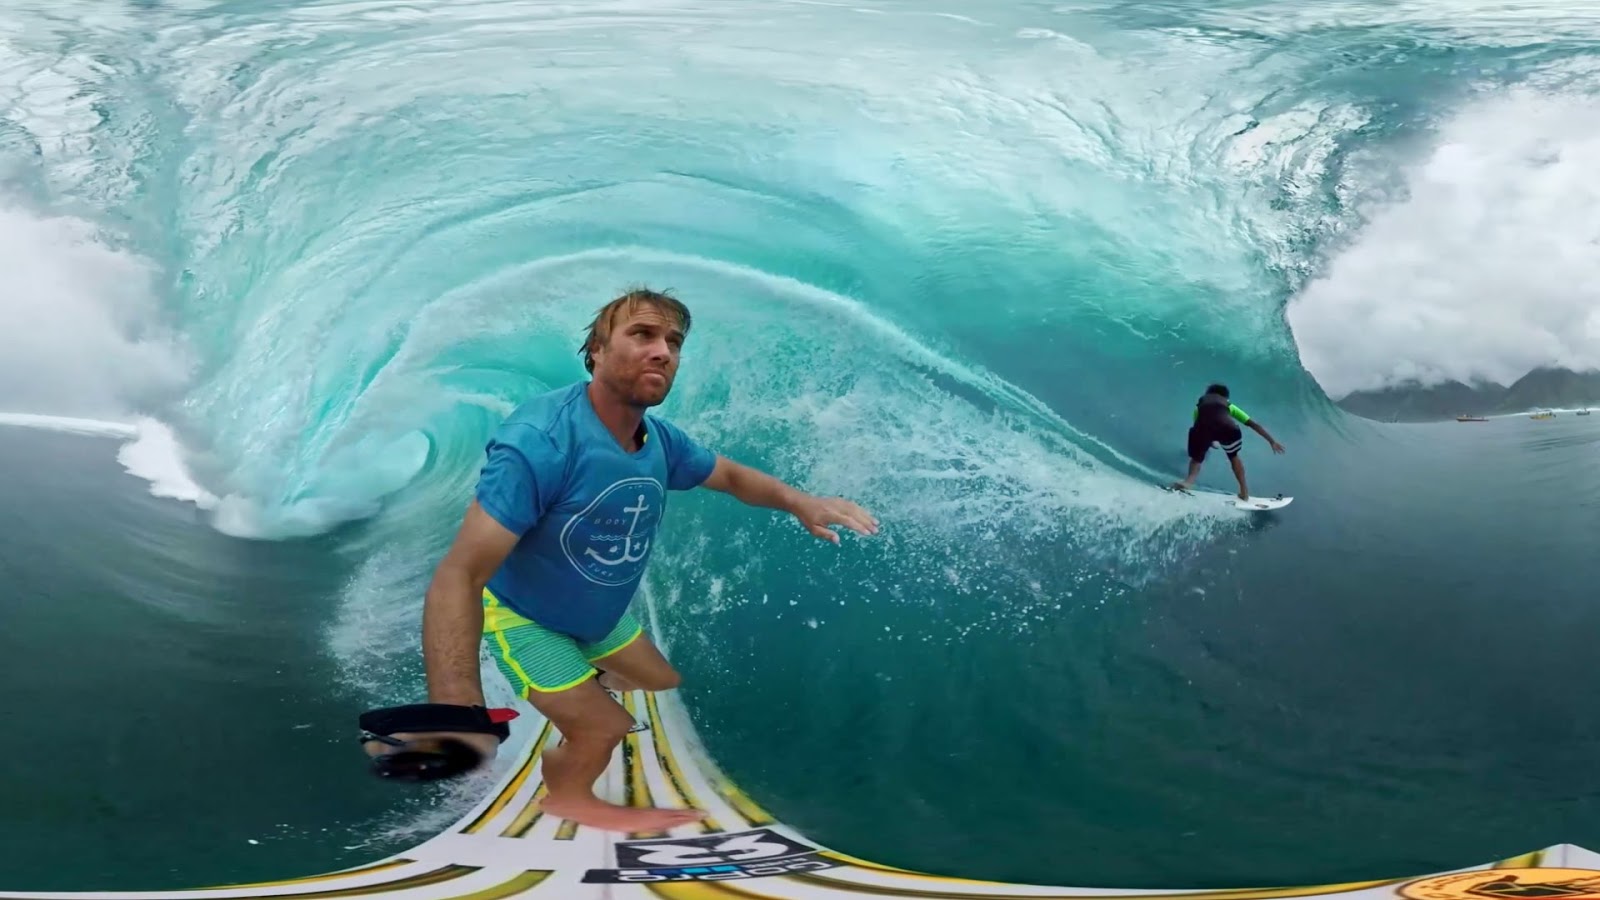 Surfing with GoPro